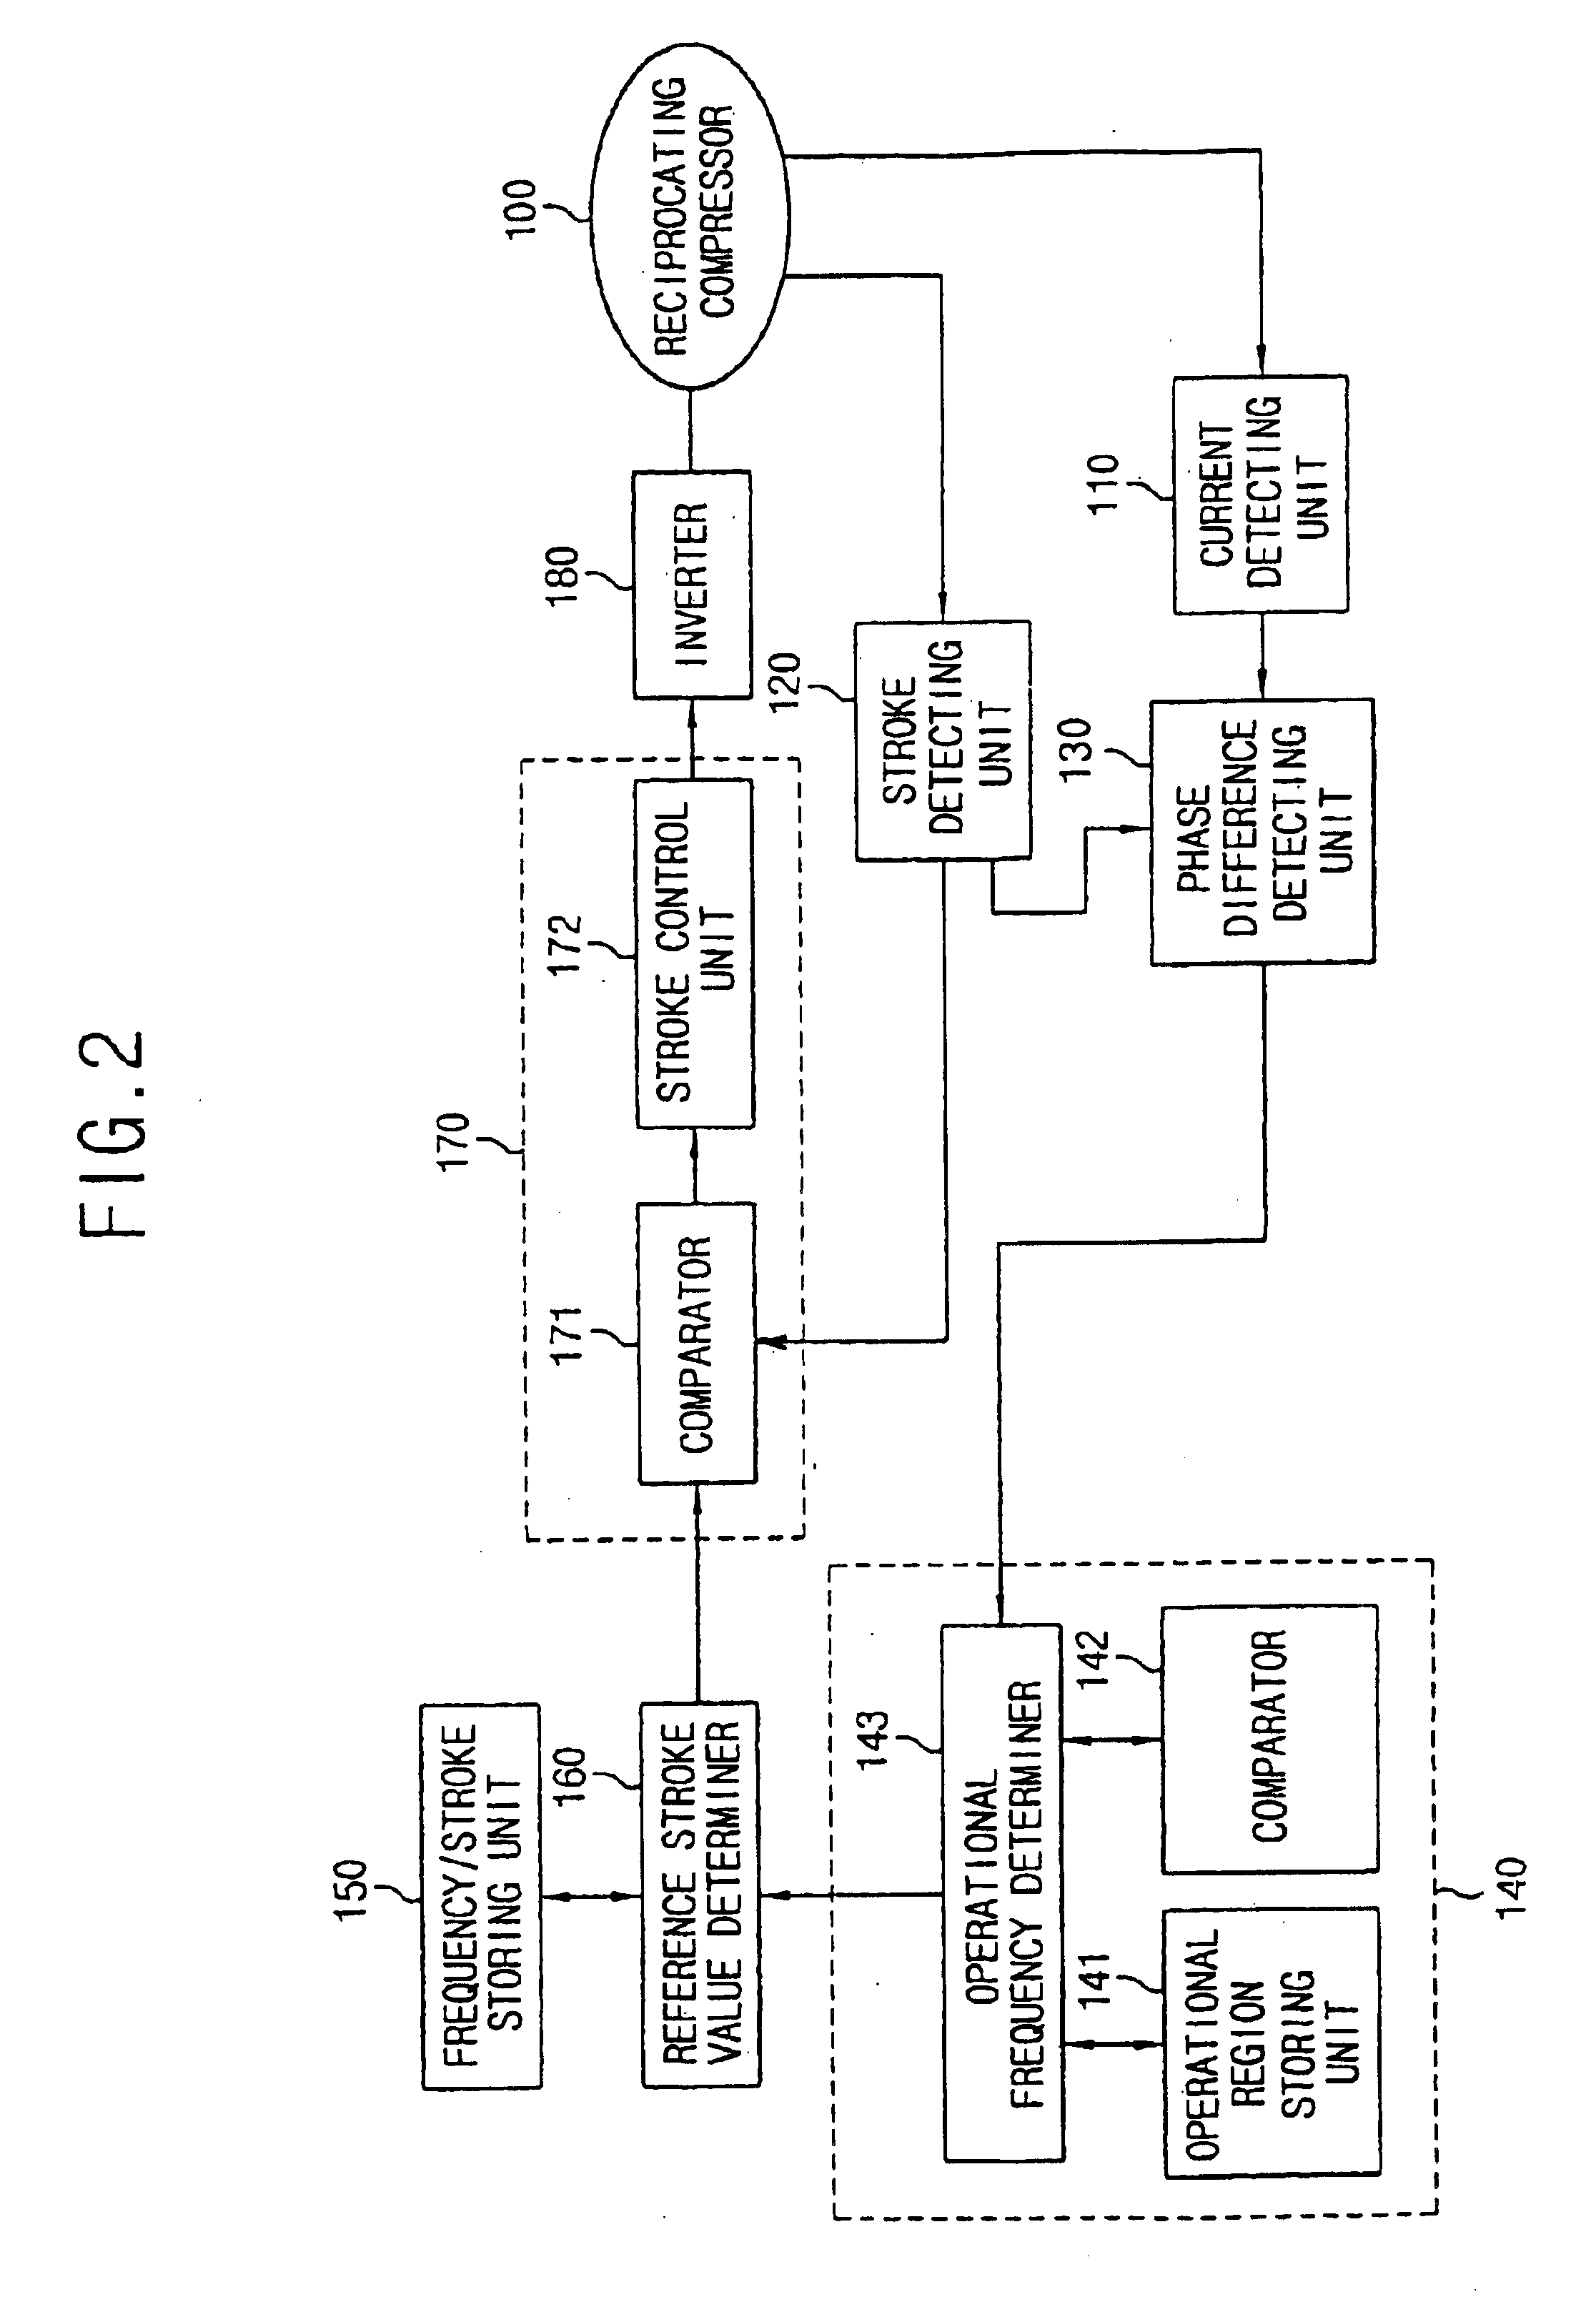 Stroke control apparatus of reciprocating compressor and method thereof